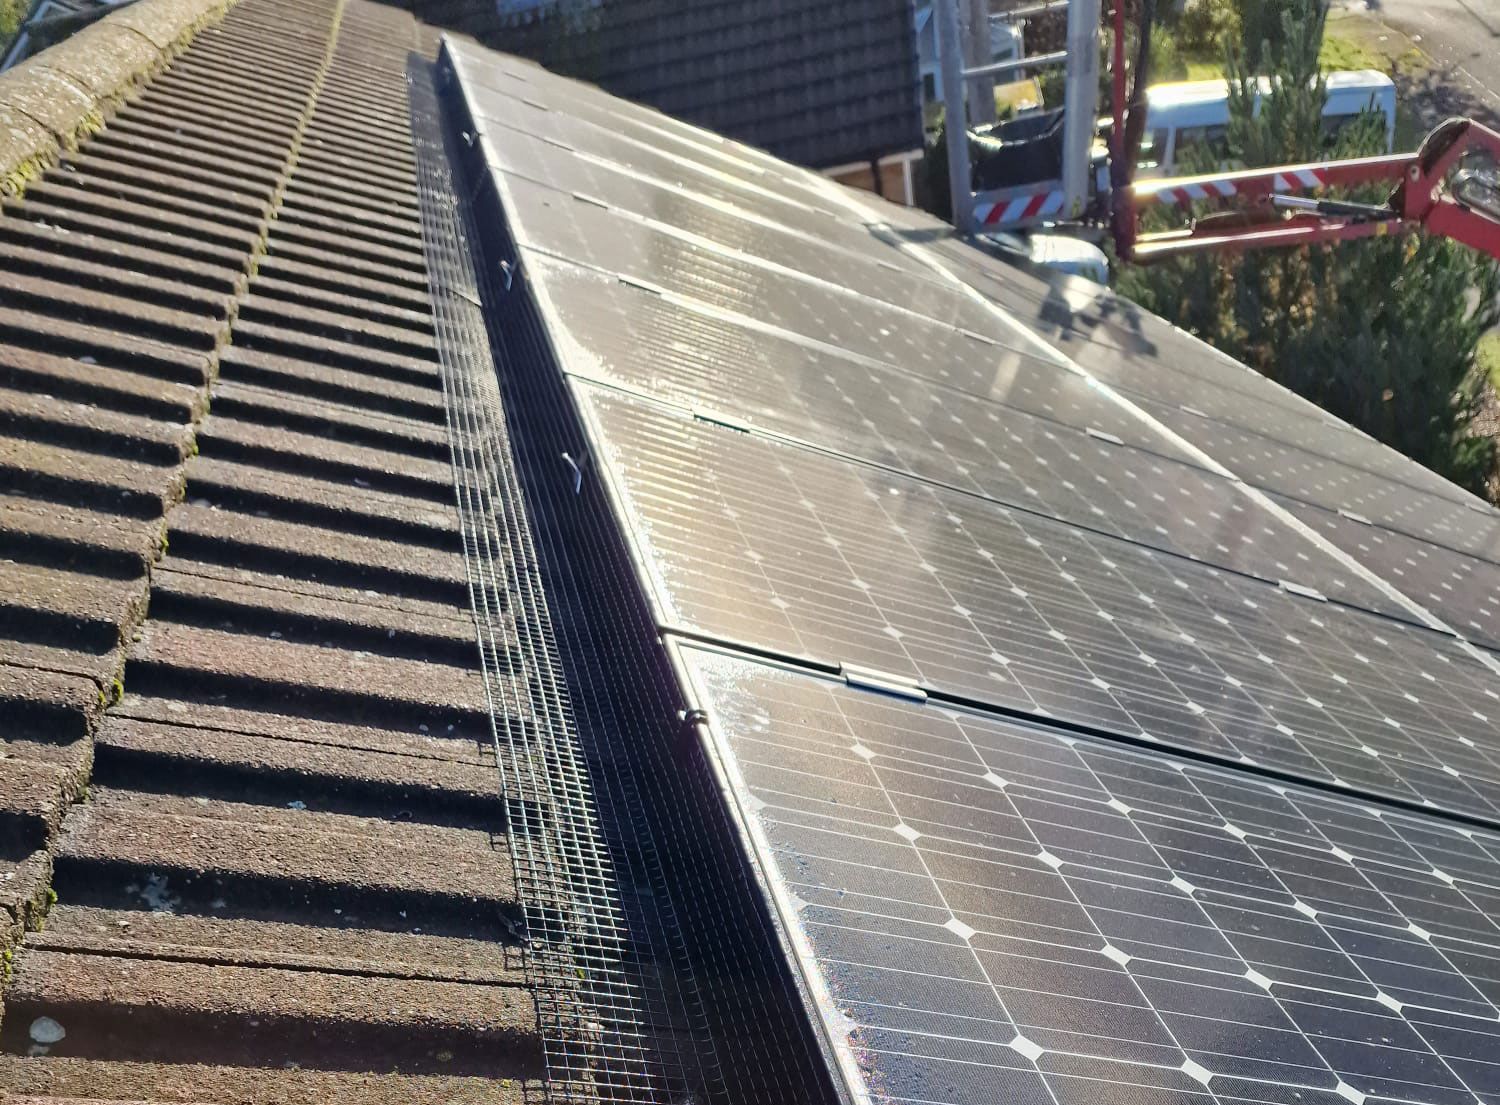 Pigeon Proofing Solar Panels in Mansfield